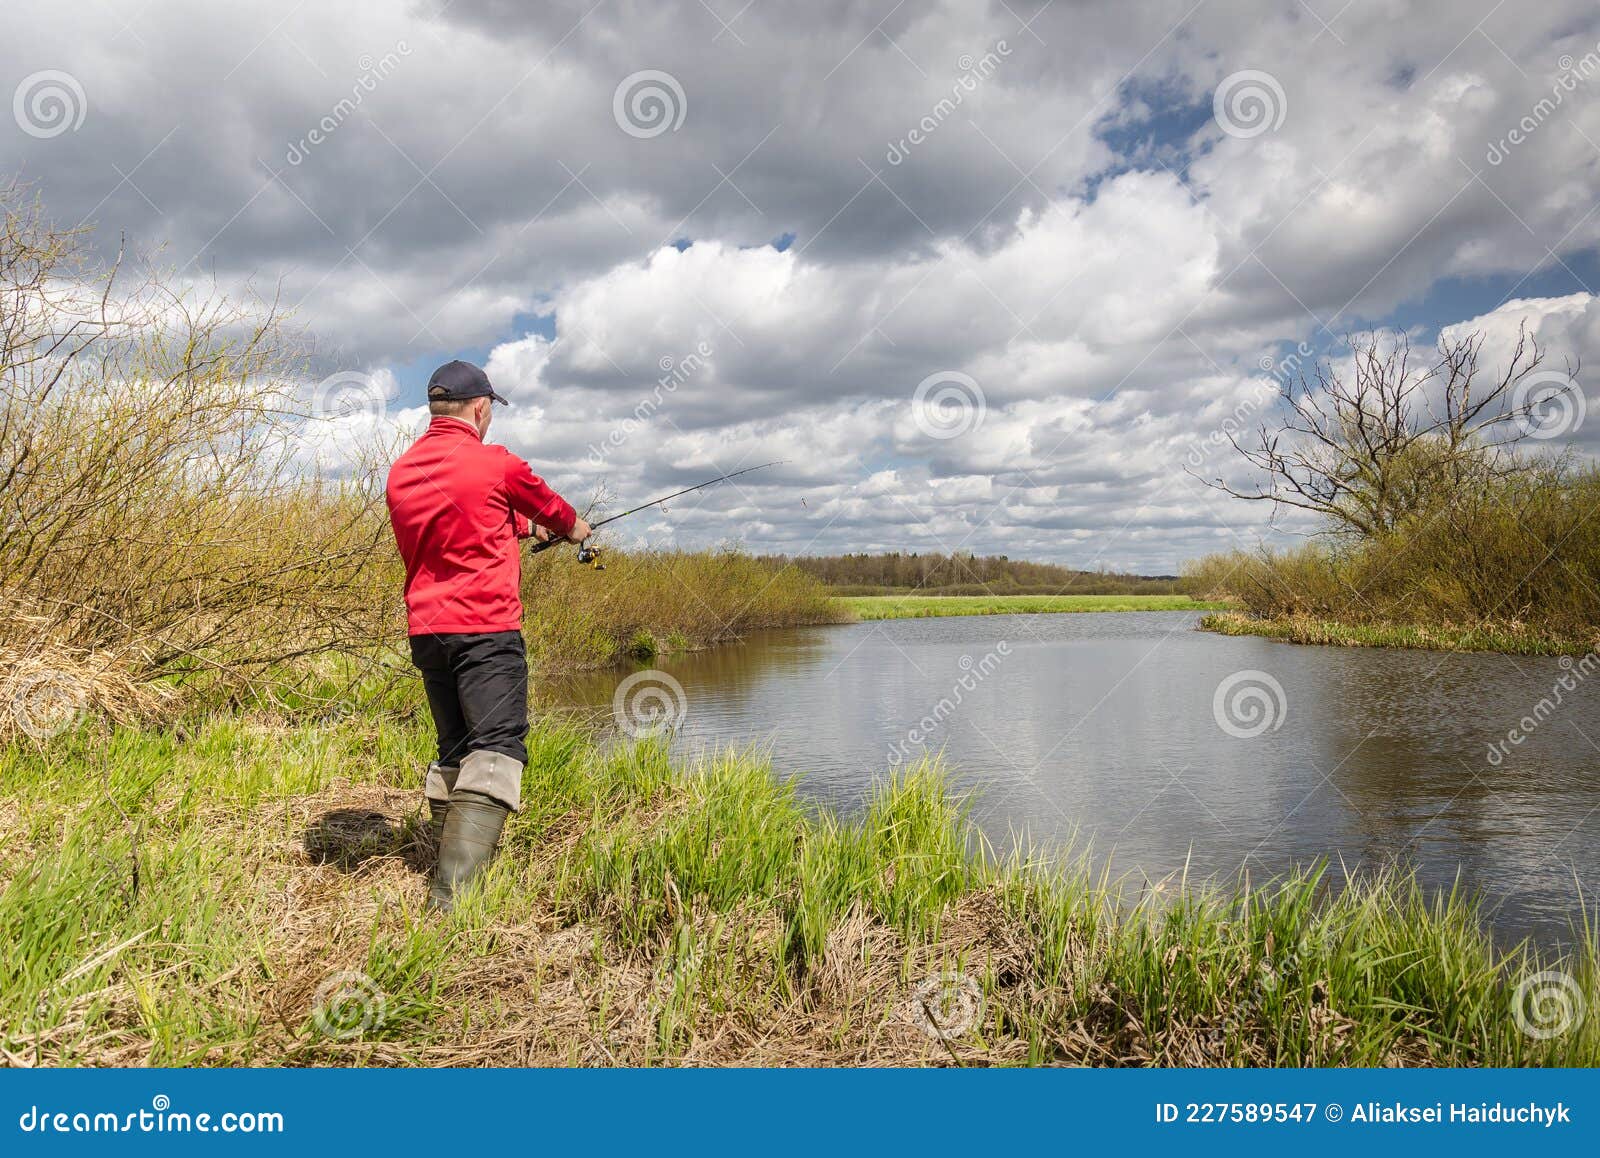 https://thumbs.dreamstime.com/z/fisher-fishing-rod-stands-river-bank-beautiful-landscape-fisher-fishing-rod-stands-river-bank-227589547.jpg